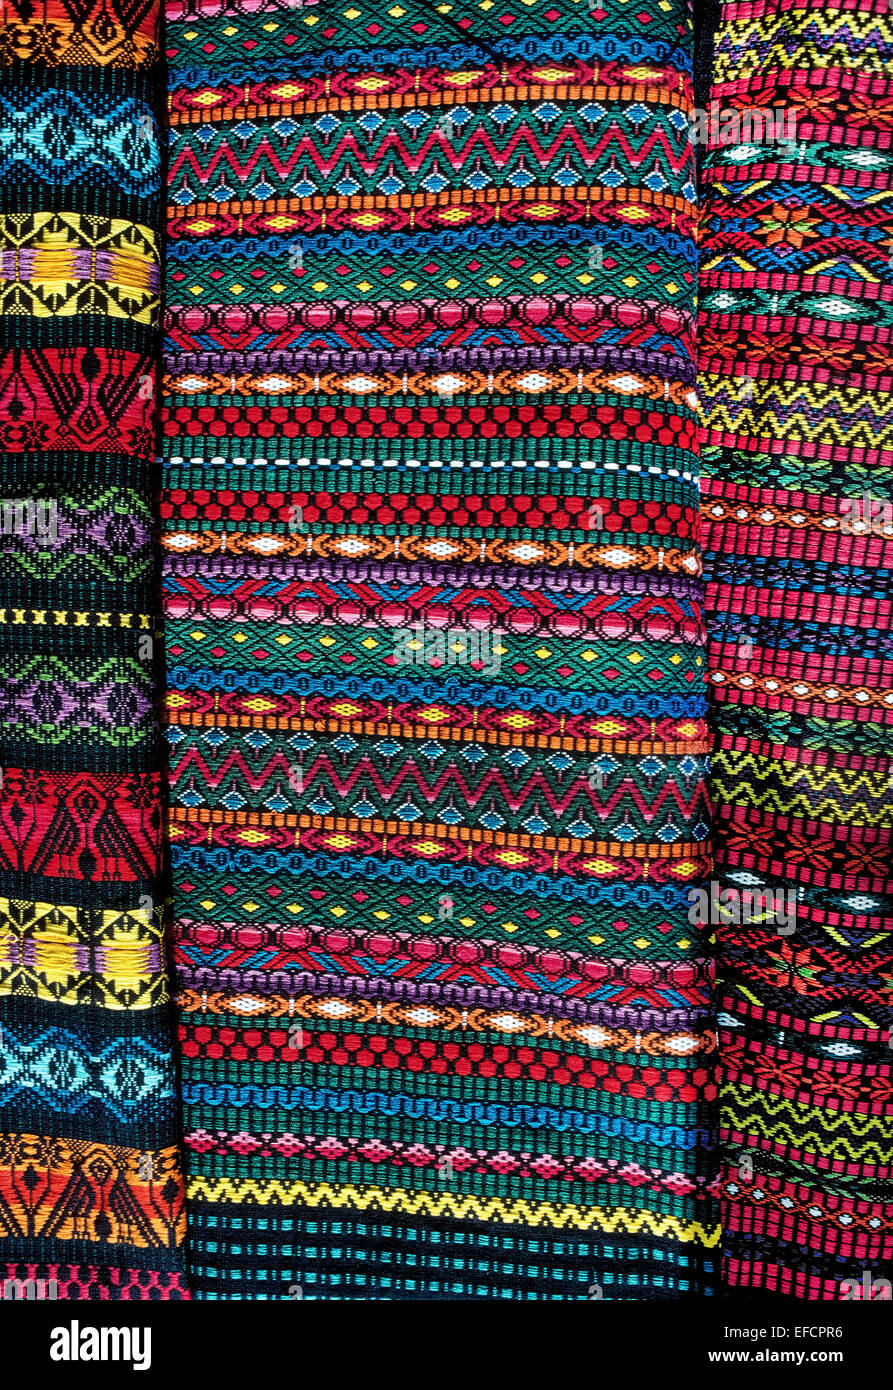 Beautiful colors and intricate geometrical designs identify the fabrics handwoven by Mayan women in the highlands of Guatemala. Stock Photo